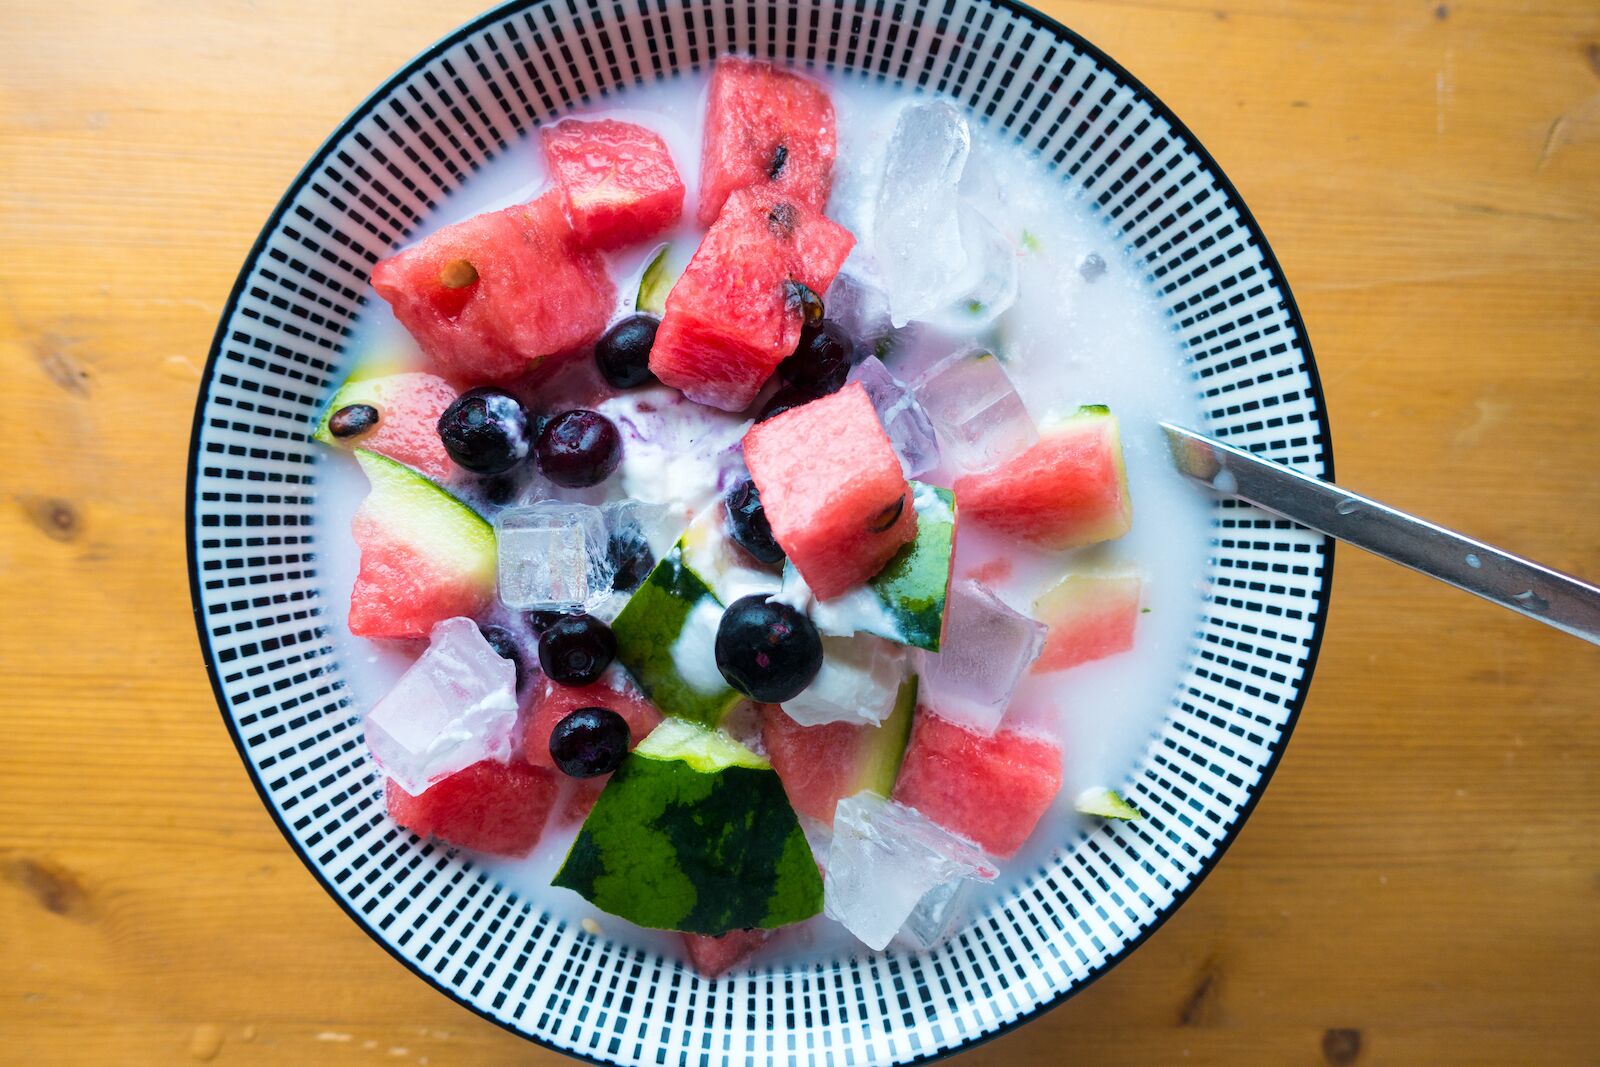 Hwachae, or watermelon punch, with milk and other cut up fruits, in a blue bowl